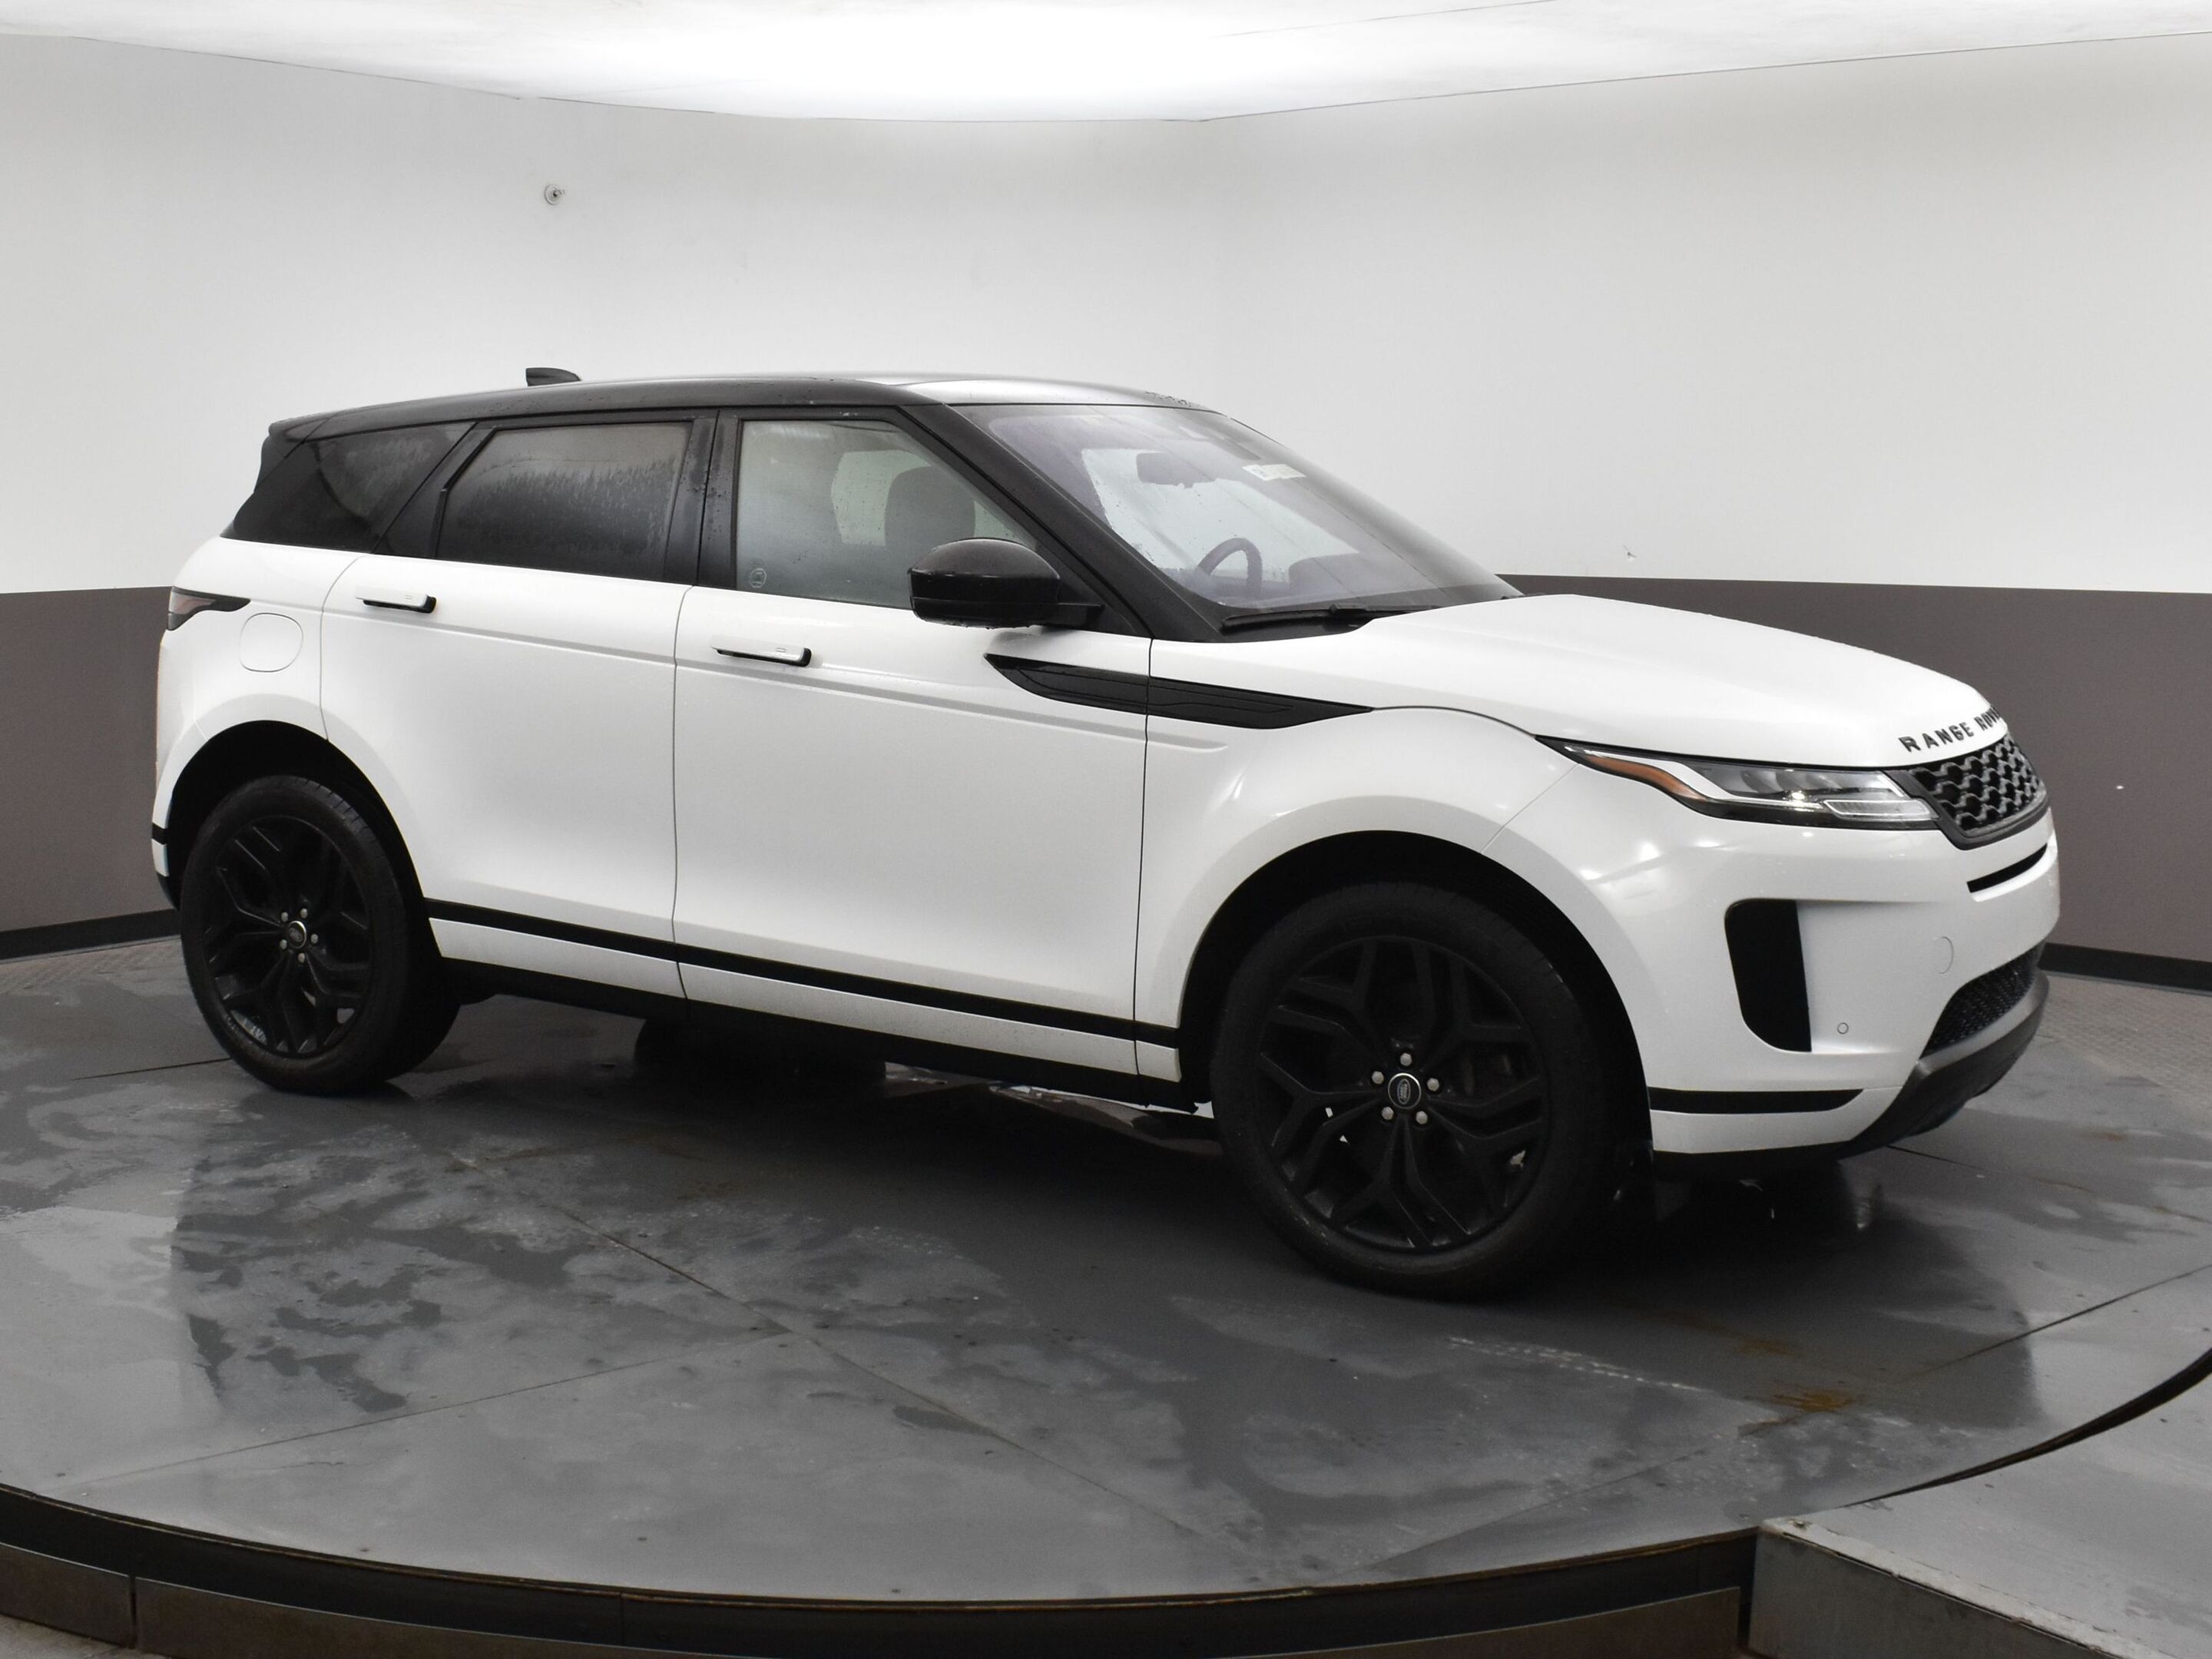 2020 Land Rover Range Rover Evoque S WITH HEATED SEATS, DUAL CLIMATE CONTROL, SMARTPH